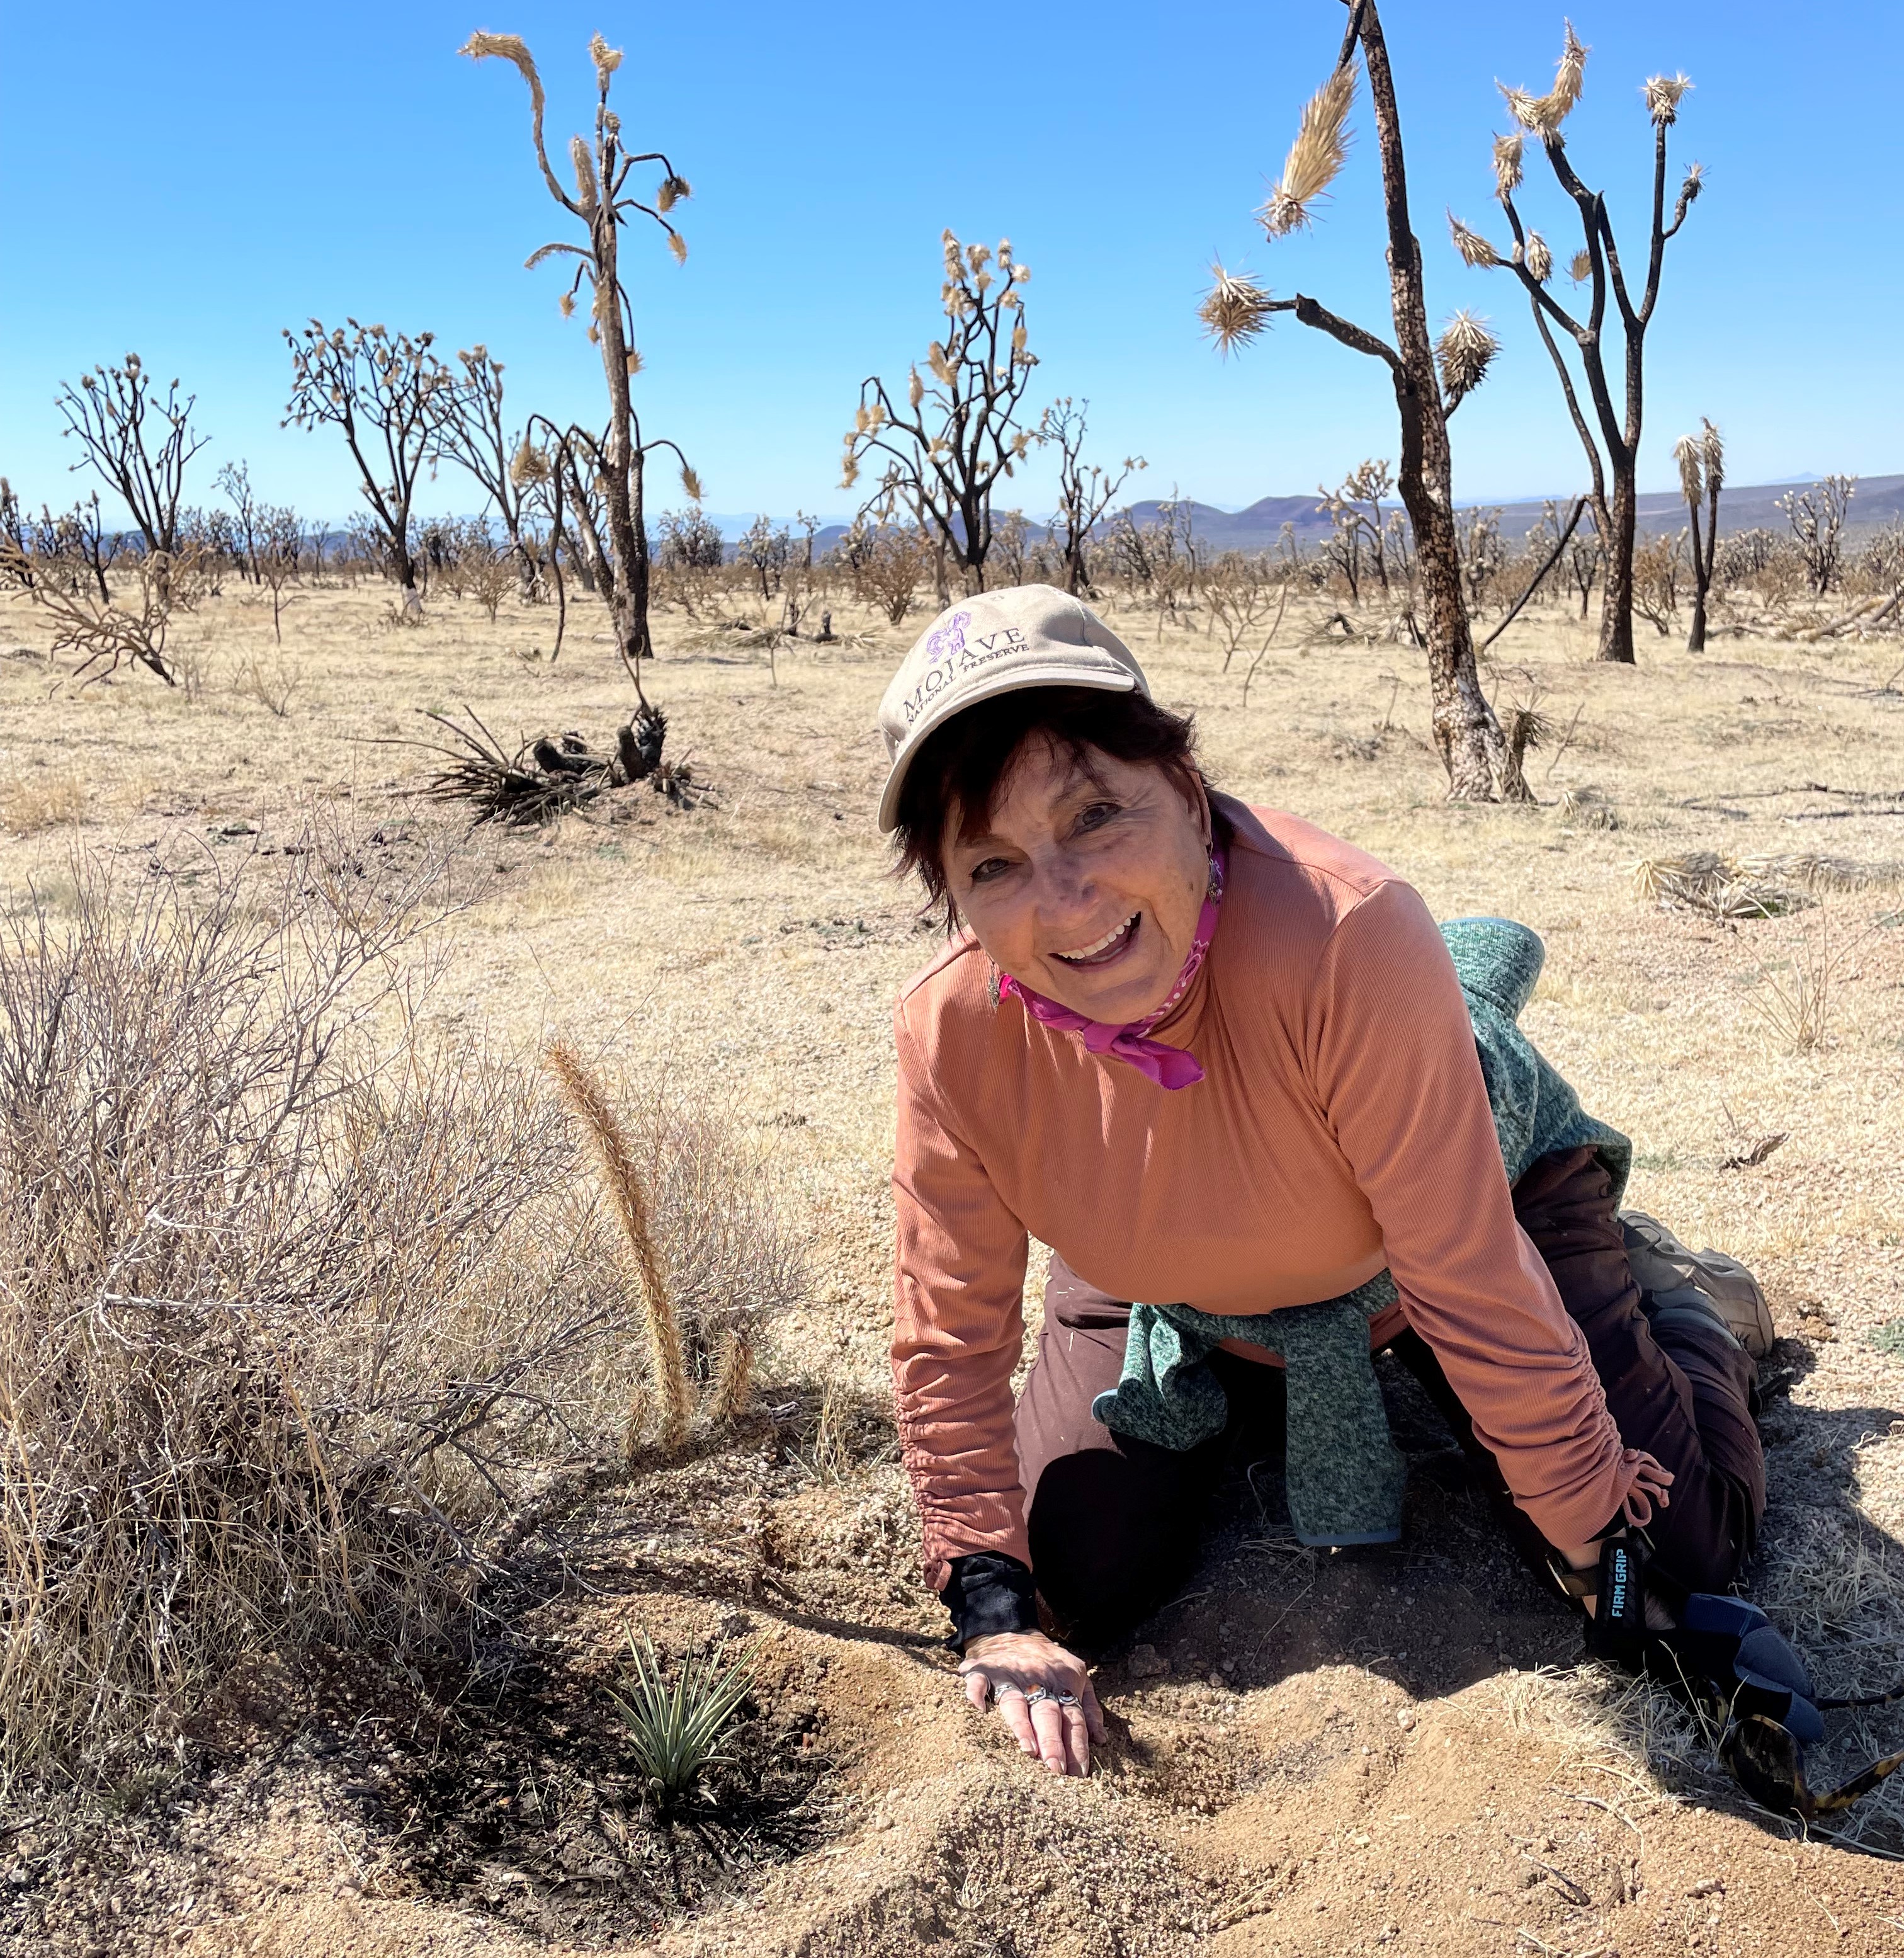 Woman smiles while planting a young Joshua tree into the ground on a sunny day.